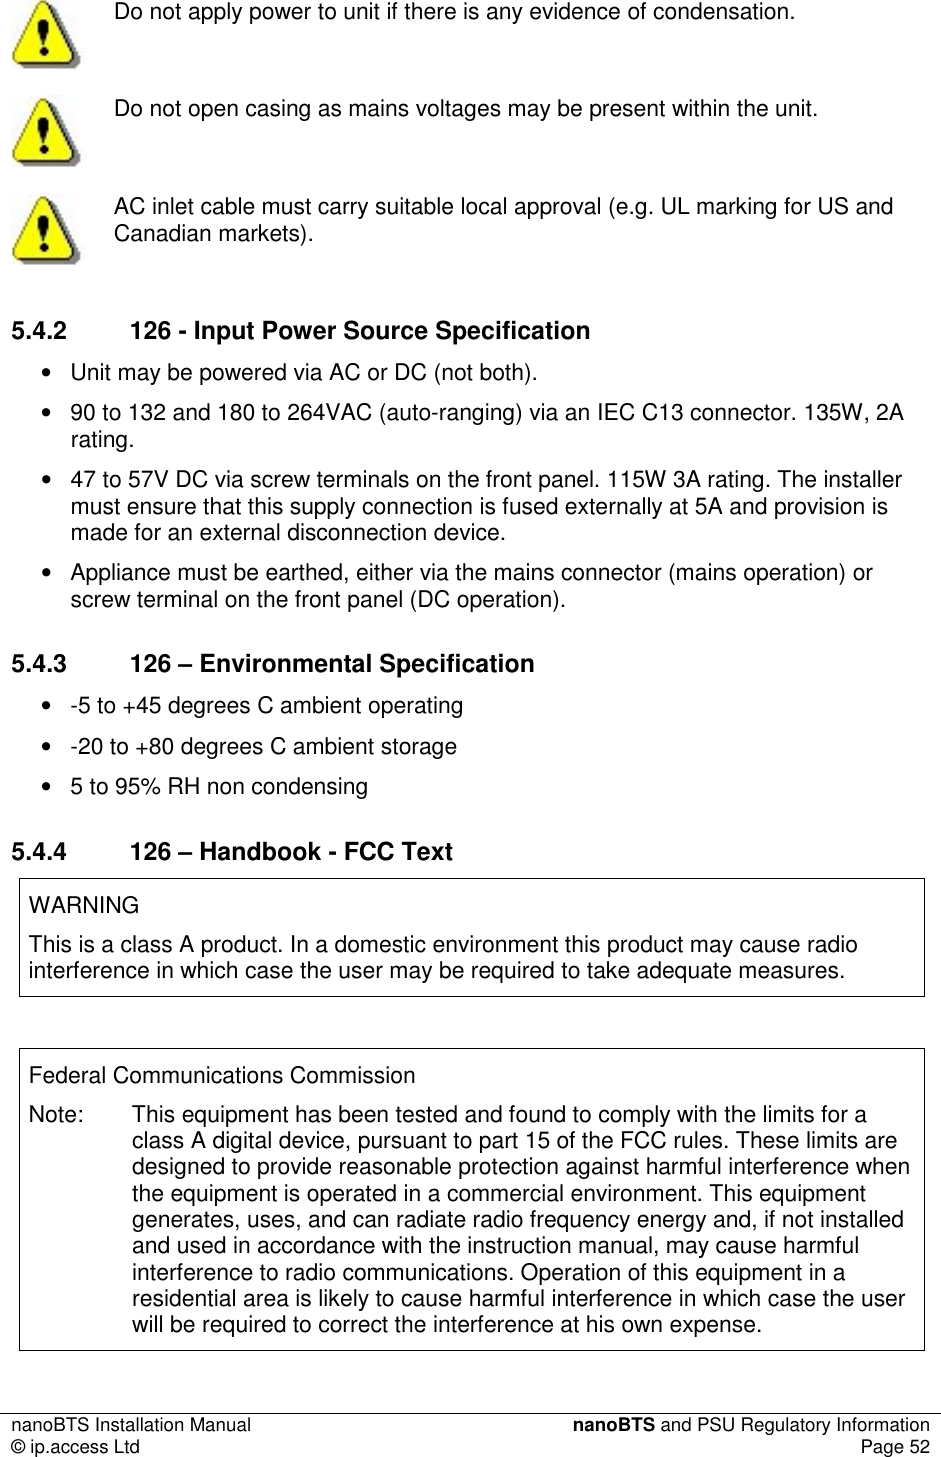 nanoBTS Installation Manual  nanoBTS and PSU Regulatory Information © ip.access Ltd  Page 52   Do not apply power to unit if there is any evidence of condensation.  Do not open casing as mains voltages may be present within the unit.  AC inlet cable must carry suitable local approval (e.g. UL marking for US and Canadian markets). 5.4.2  126 - Input Power Source Specification •  Unit may be powered via AC or DC (not both). •  90 to 132 and 180 to 264VAC (auto-ranging) via an IEC C13 connector. 135W, 2A rating. •  47 to 57V DC via screw terminals on the front panel. 115W 3A rating. The installer must ensure that this supply connection is fused externally at 5A and provision is made for an external disconnection device. •  Appliance must be earthed, either via the mains connector (mains operation) or screw terminal on the front panel (DC operation). 5.4.3  126 – Environmental Specification •  -5 to +45 degrees C ambient operating •  -20 to +80 degrees C ambient storage •  5 to 95% RH non condensing 5.4.4  126 – Handbook - FCC Text WARNING This is a class A product. In a domestic environment this product may cause radio interference in which case the user may be required to take adequate measures.  Federal Communications Commission Note:  This equipment has been tested and found to comply with the limits for a class A digital device, pursuant to part 15 of the FCC rules. These limits are designed to provide reasonable protection against harmful interference when the equipment is operated in a commercial environment. This equipment generates, uses, and can radiate radio frequency energy and, if not installed and used in accordance with the instruction manual, may cause harmful interference to radio communications. Operation of this equipment in a residential area is likely to cause harmful interference in which case the user will be required to correct the interference at his own expense. 